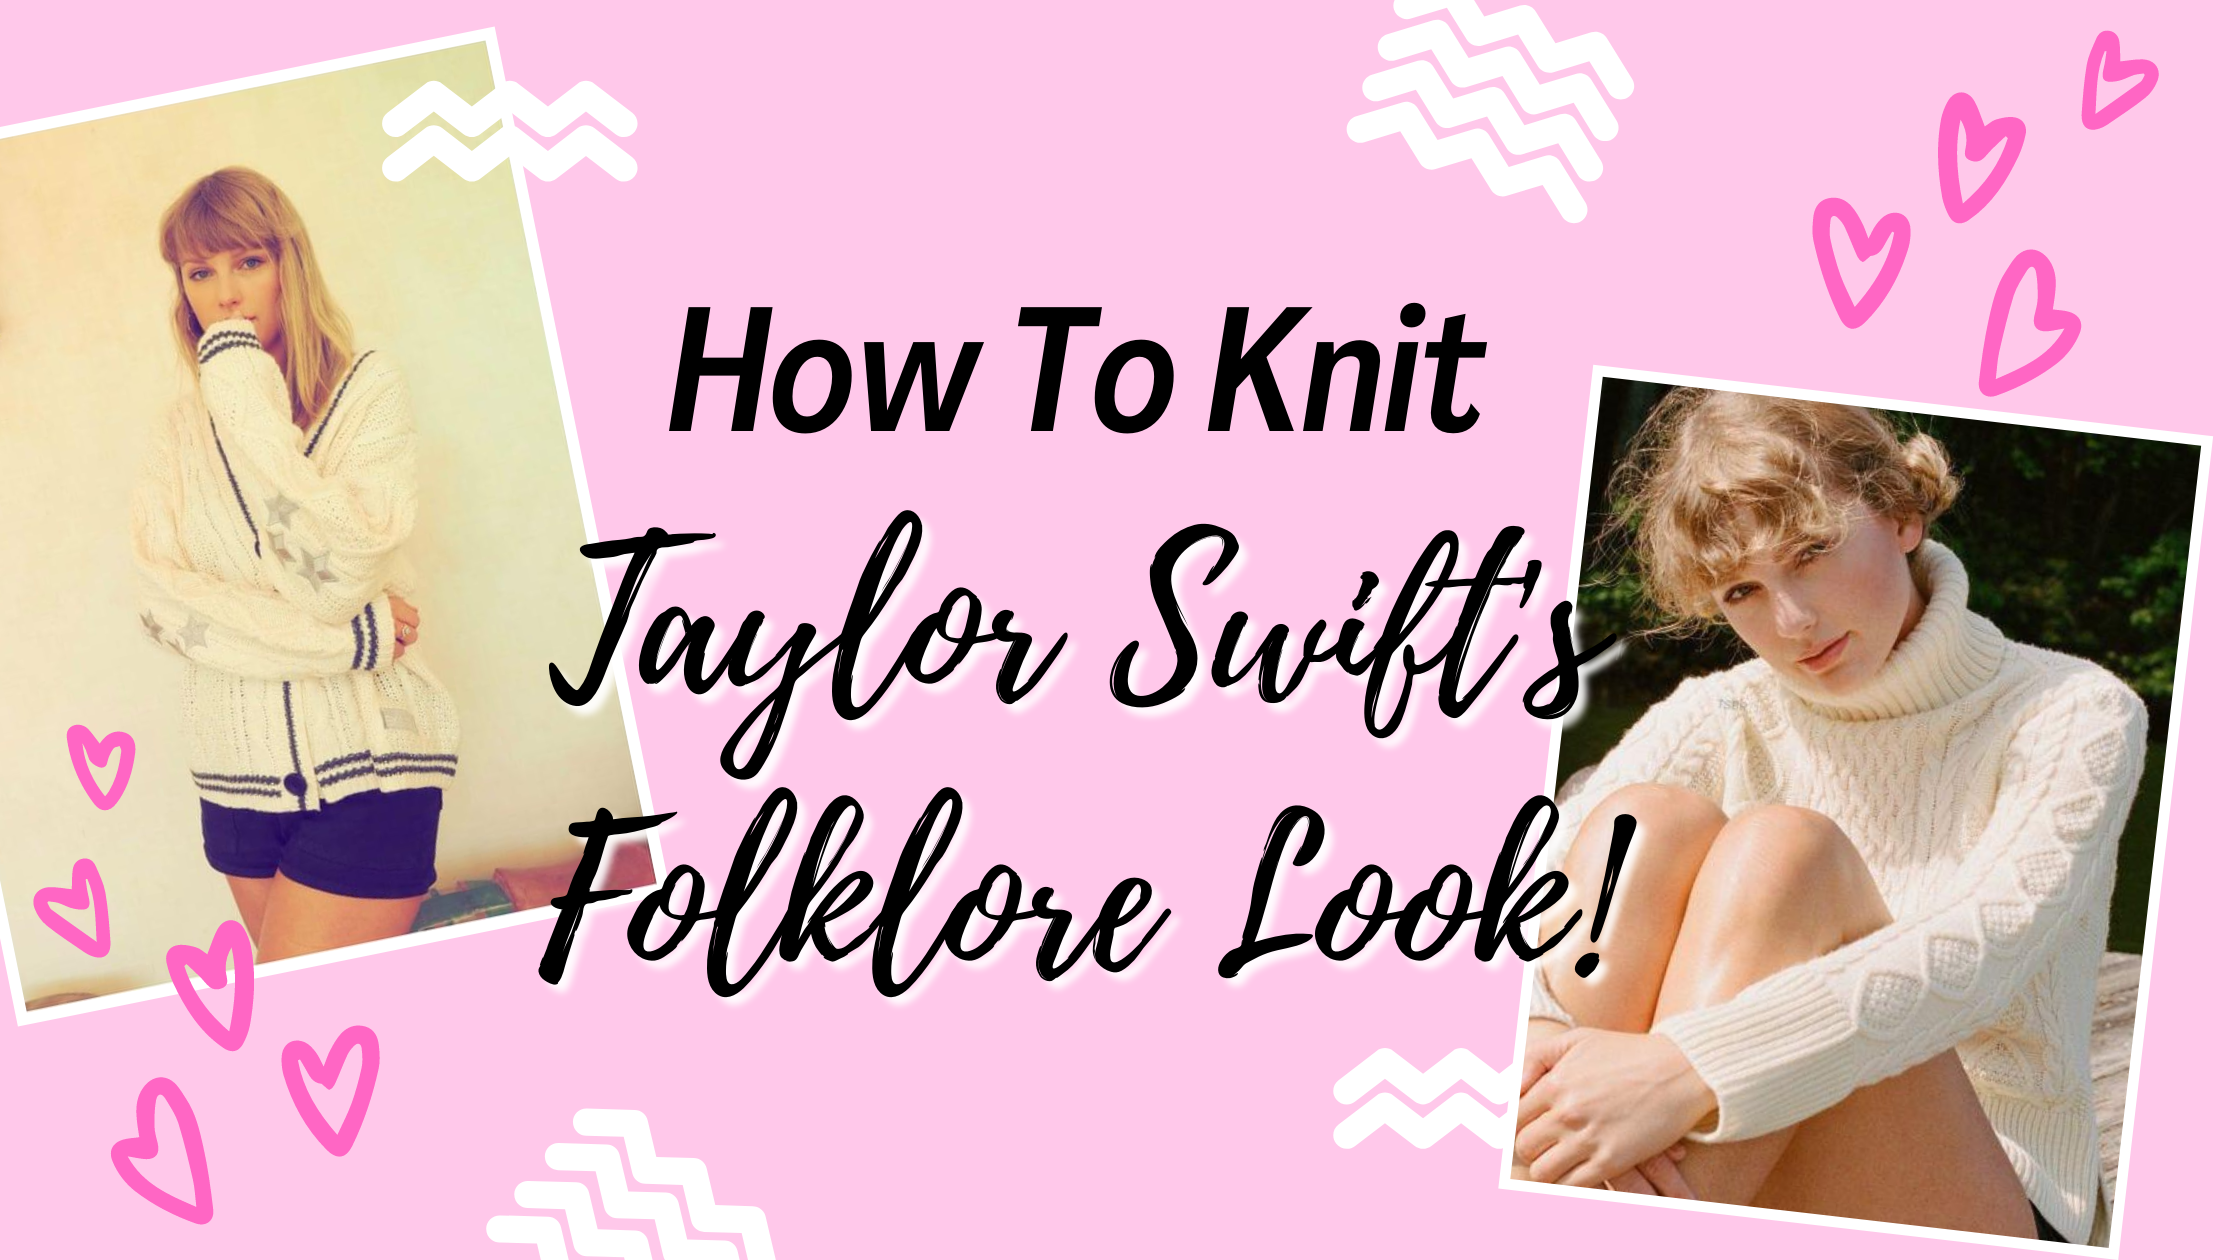 Crochet Taylor Swift's Cardigan RED / FOLKLORE Step By Step Tutorial! 